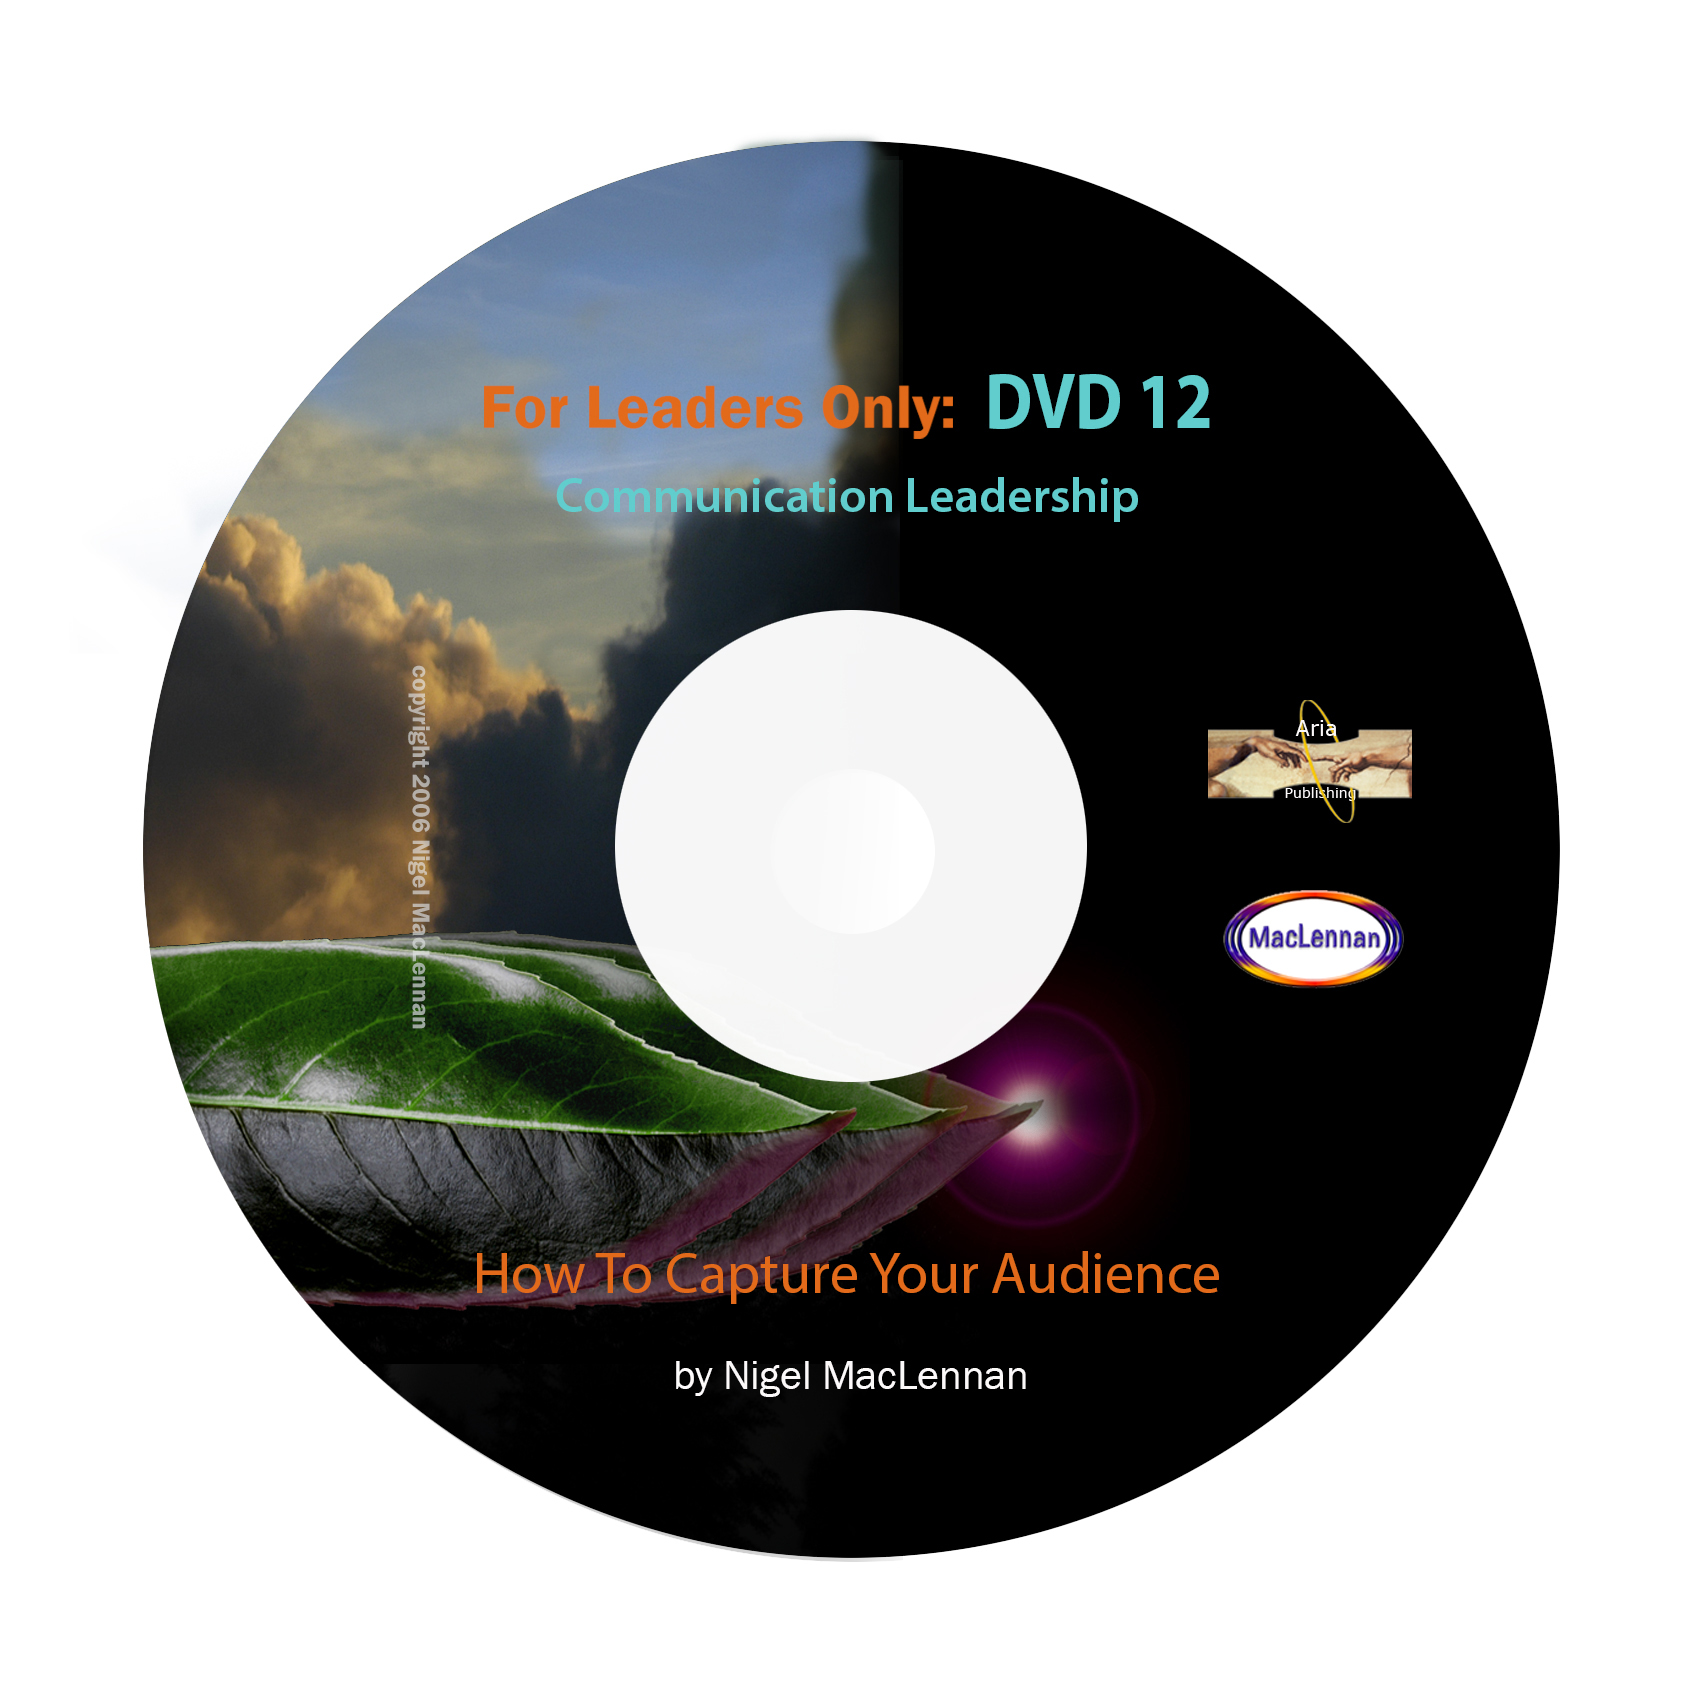 For Leaders Only - Capture Your Audience in the 1st Minute DVD